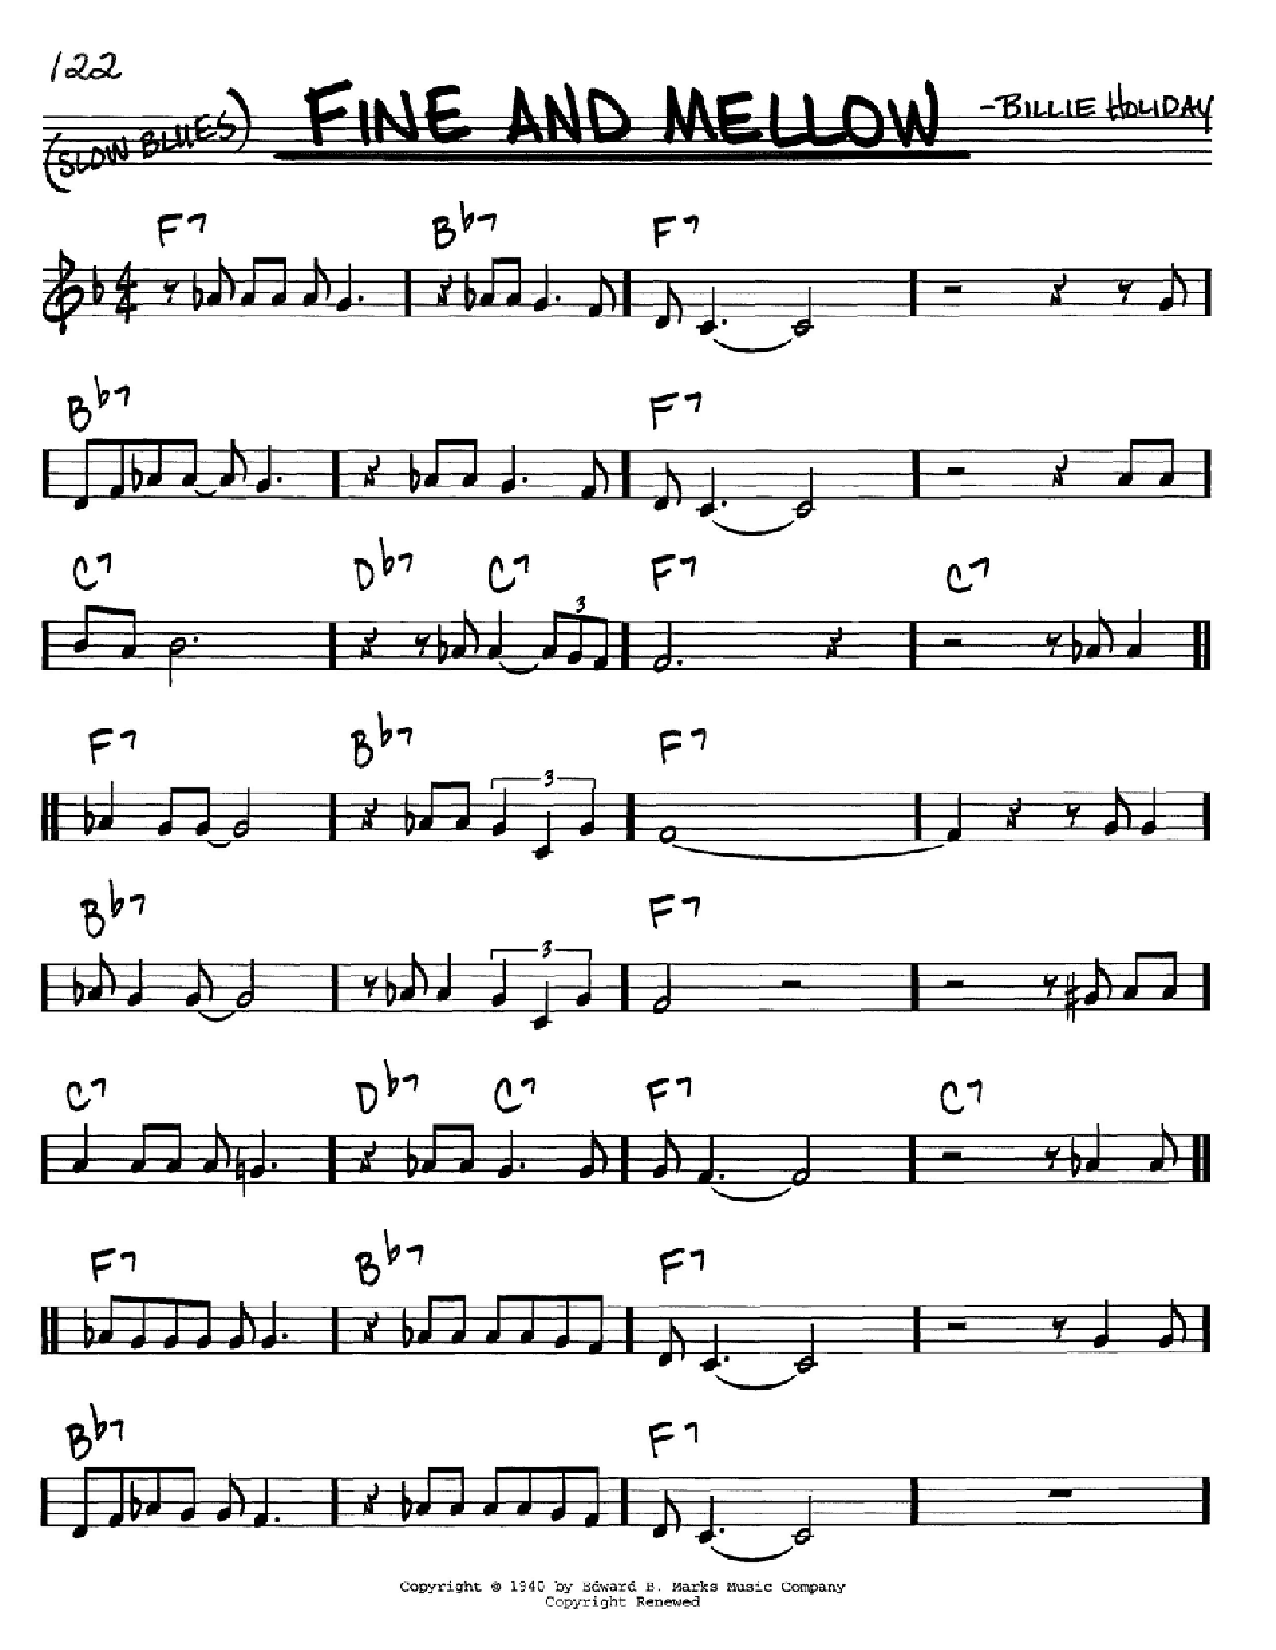 Download Billie Holiday Fine And Mellow Sheet Music